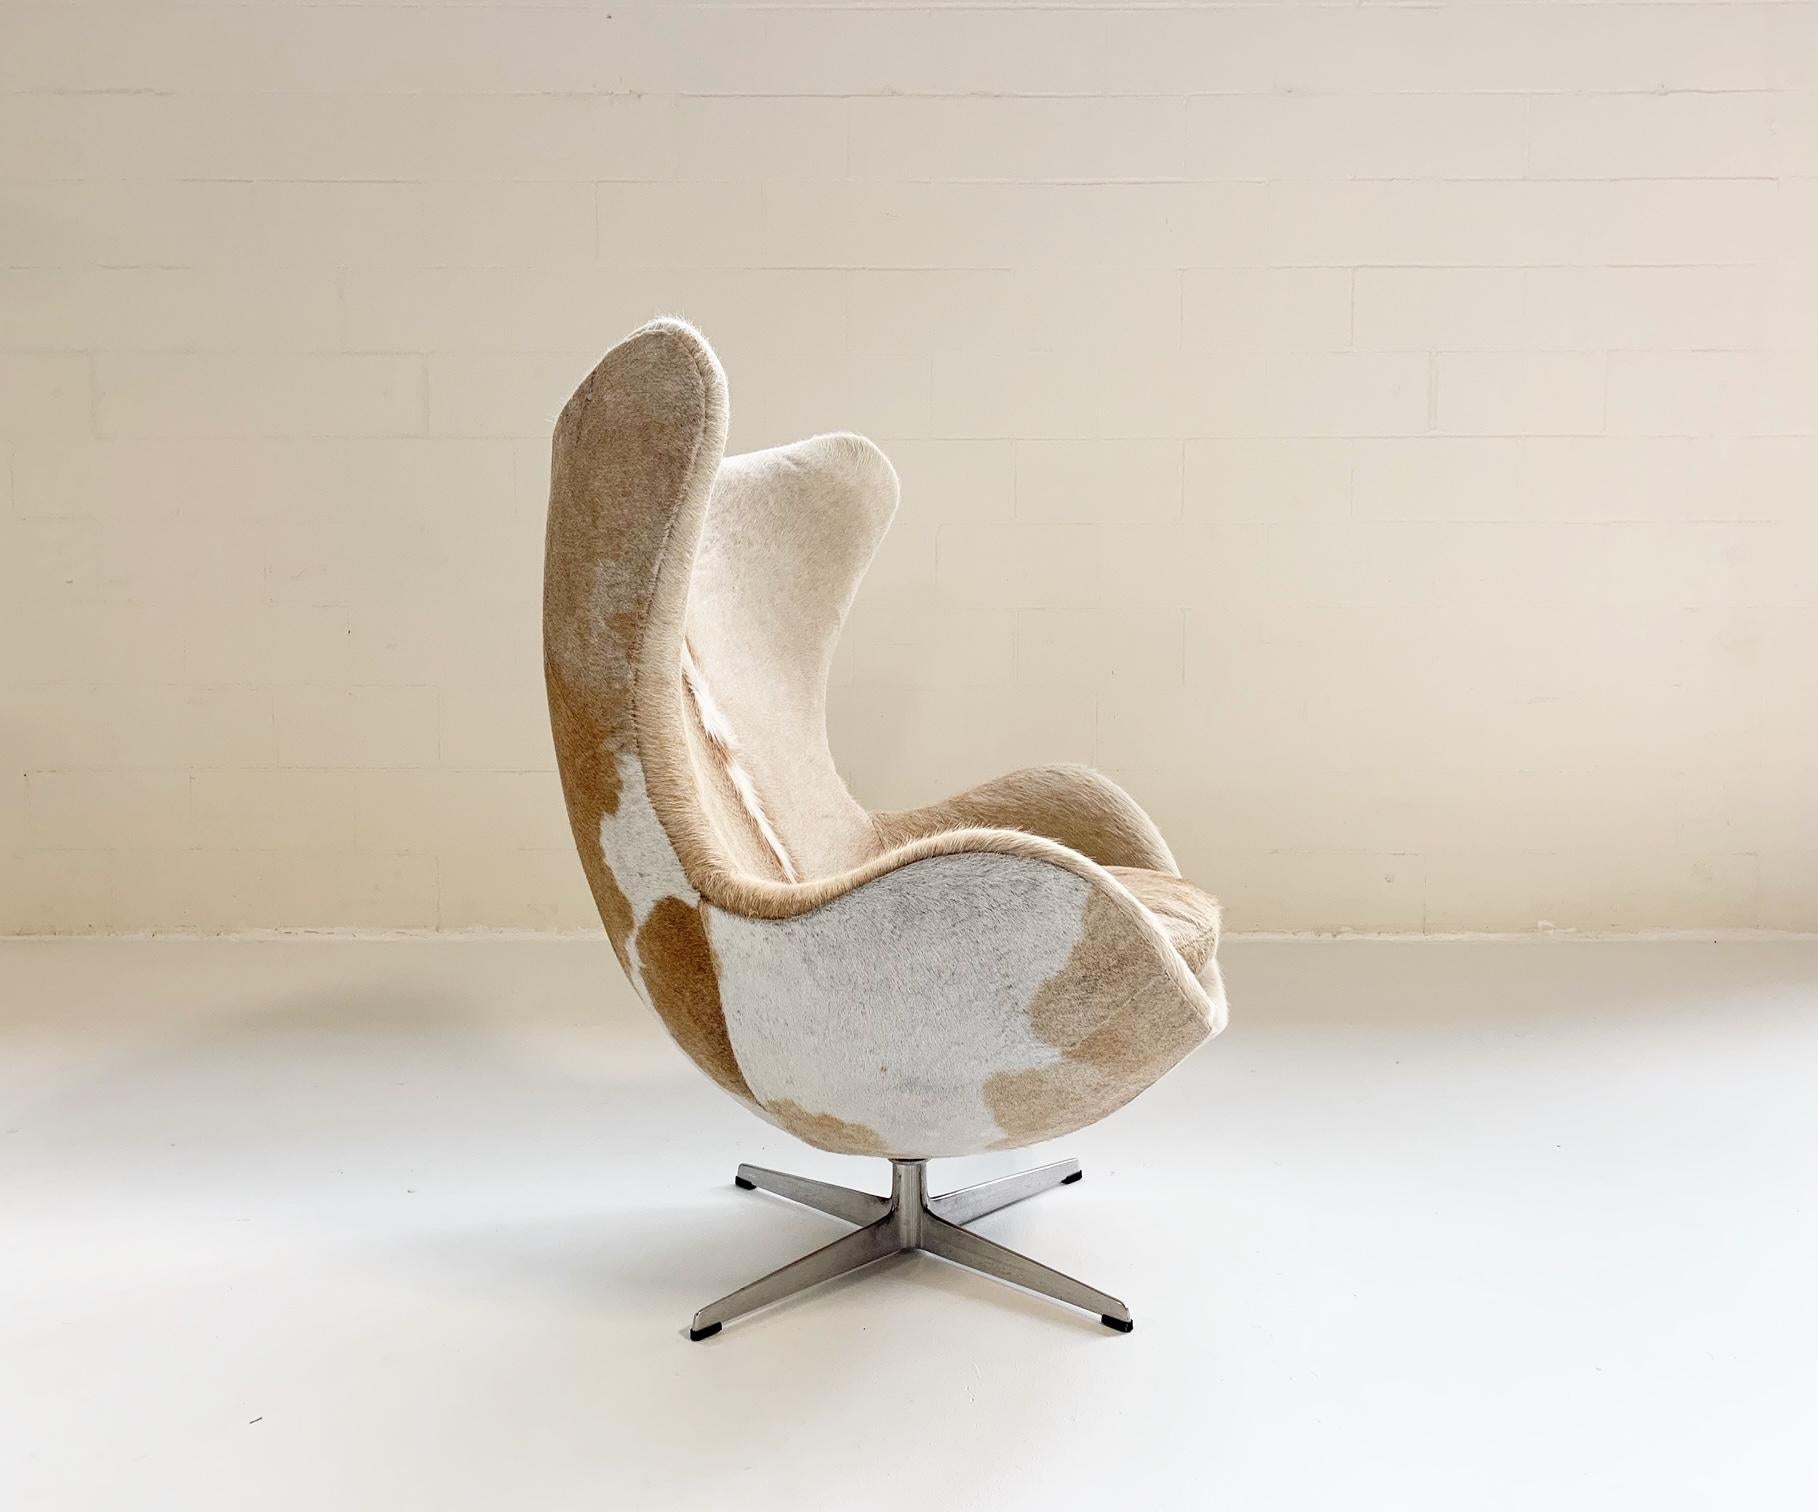 Ask any lover of mid-century furniture to name the top 5 iconic chairs of mcm design and we guarantee the Egg chair would be on that list.  The Forsyth design team was over the moon when we collected the amazing, original Arne Jacobsen Egg chair. 